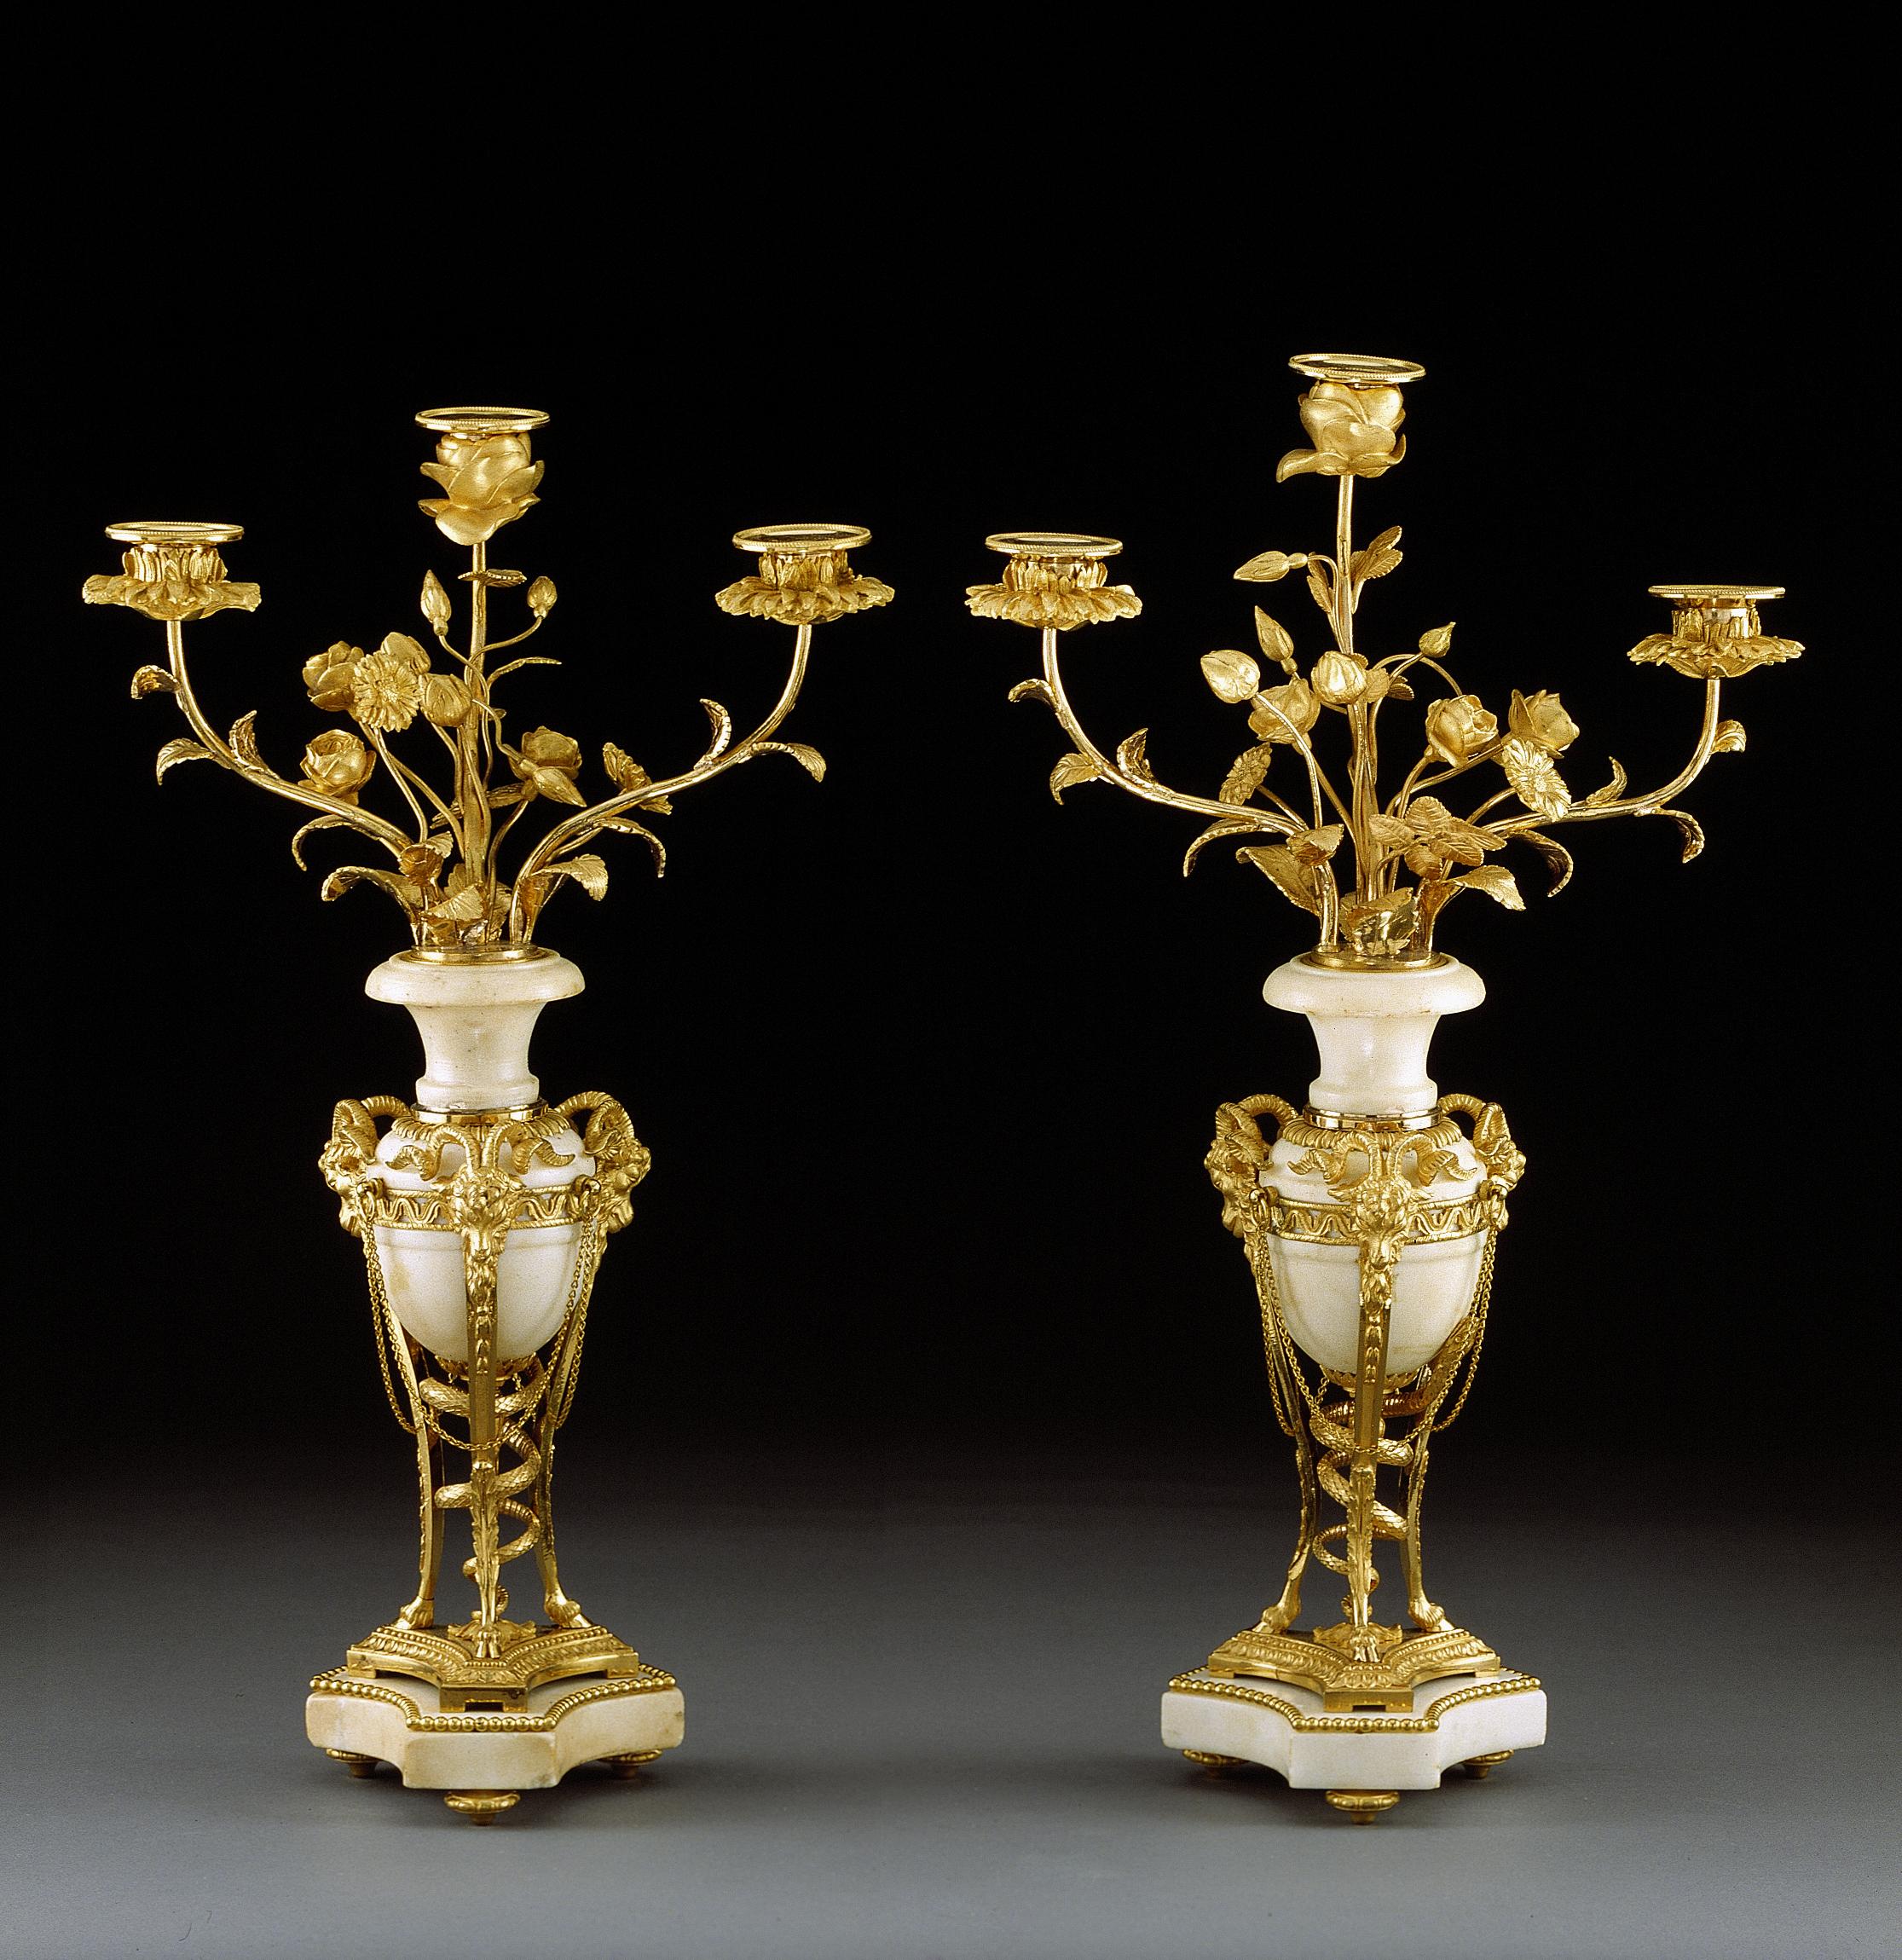 French Pair of Late 18th Century Louis XVI Ormolu and White Marble Candelabra For Sale